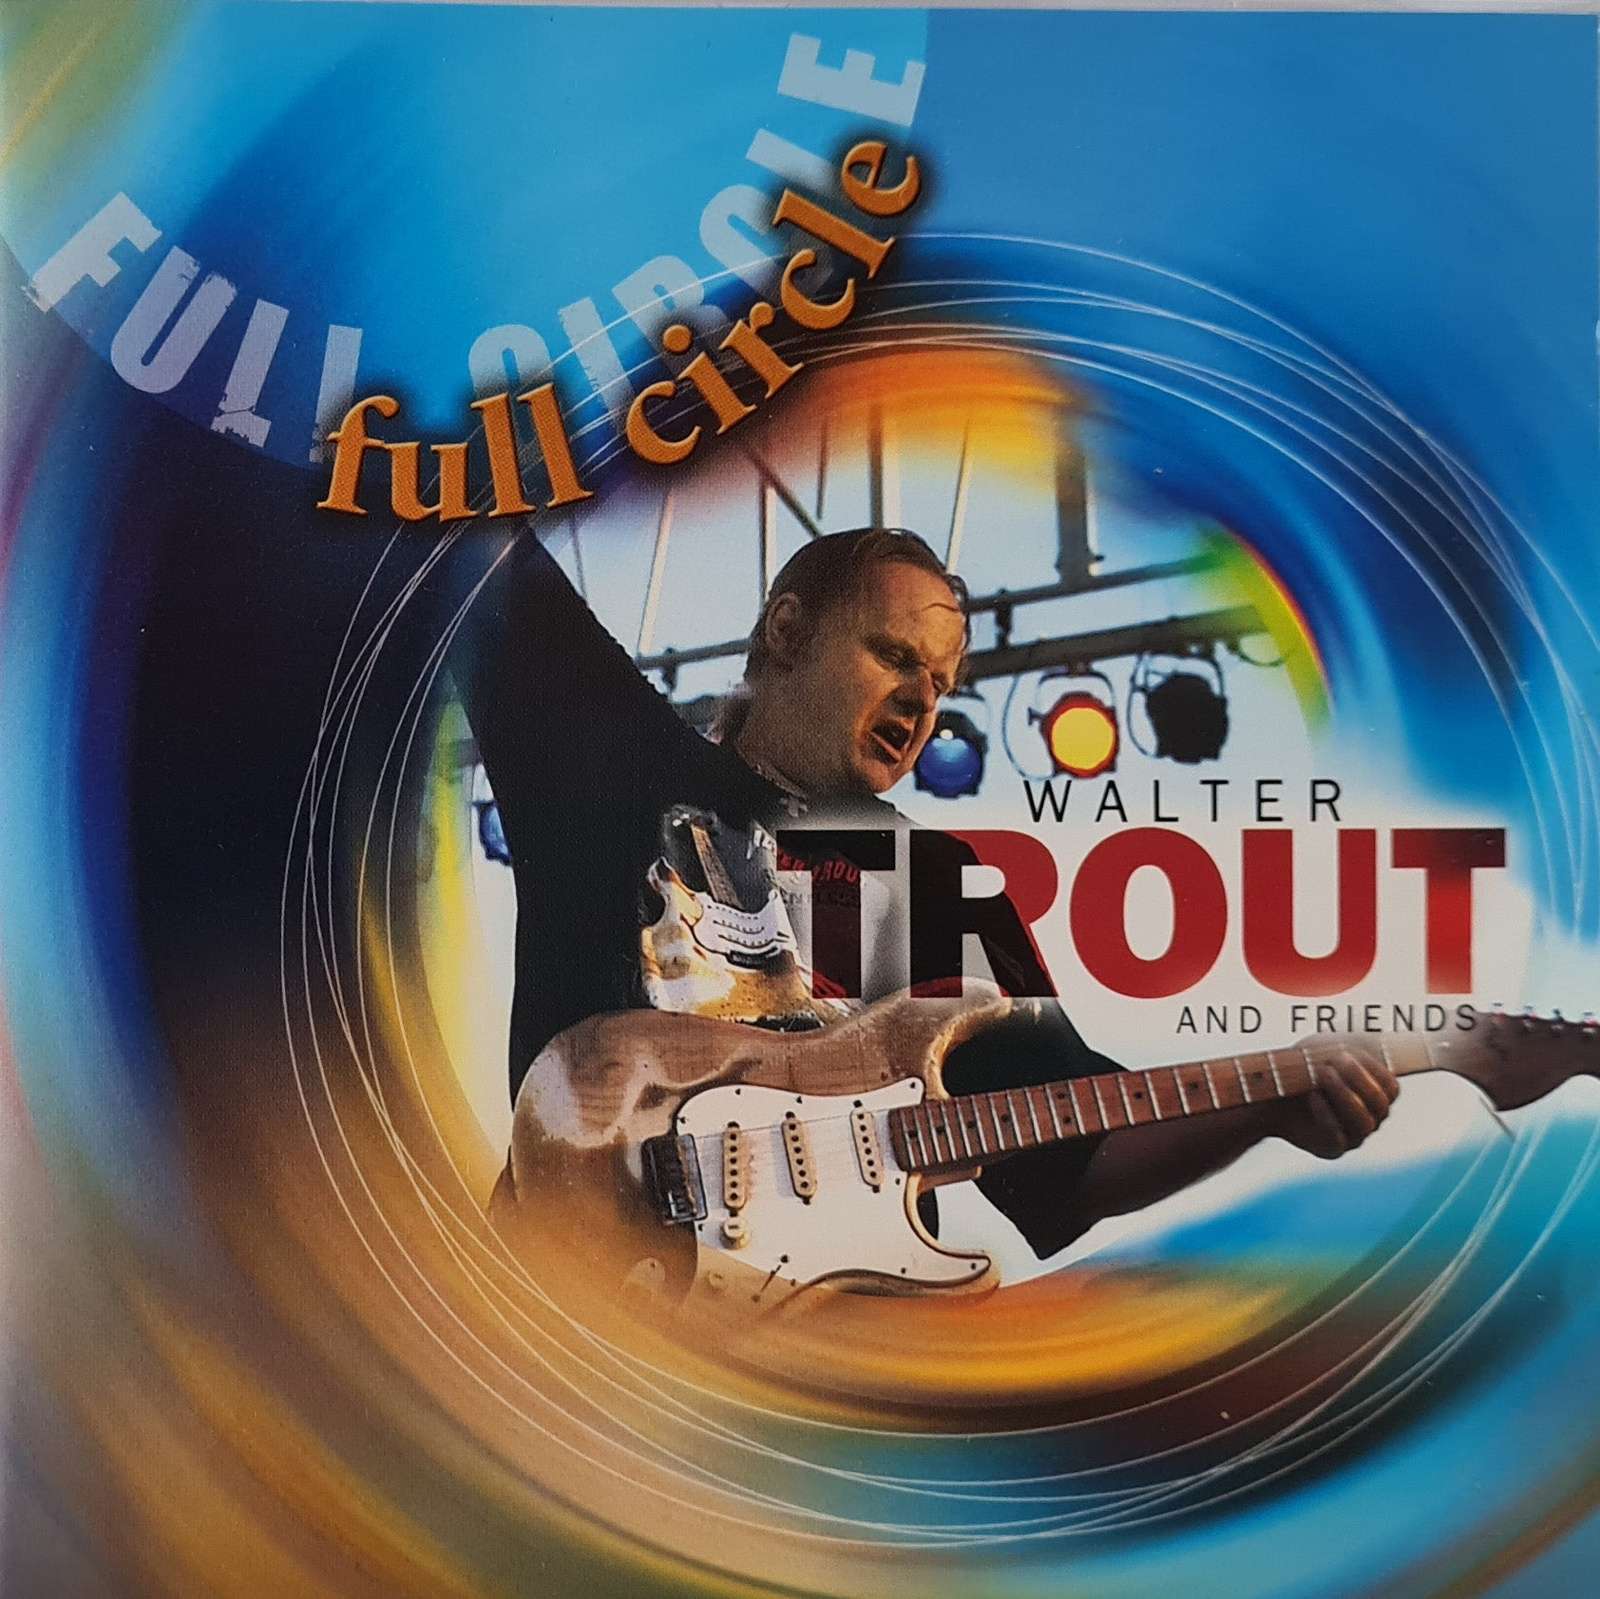 Walter Trout and Friends - Full Circle (CD)